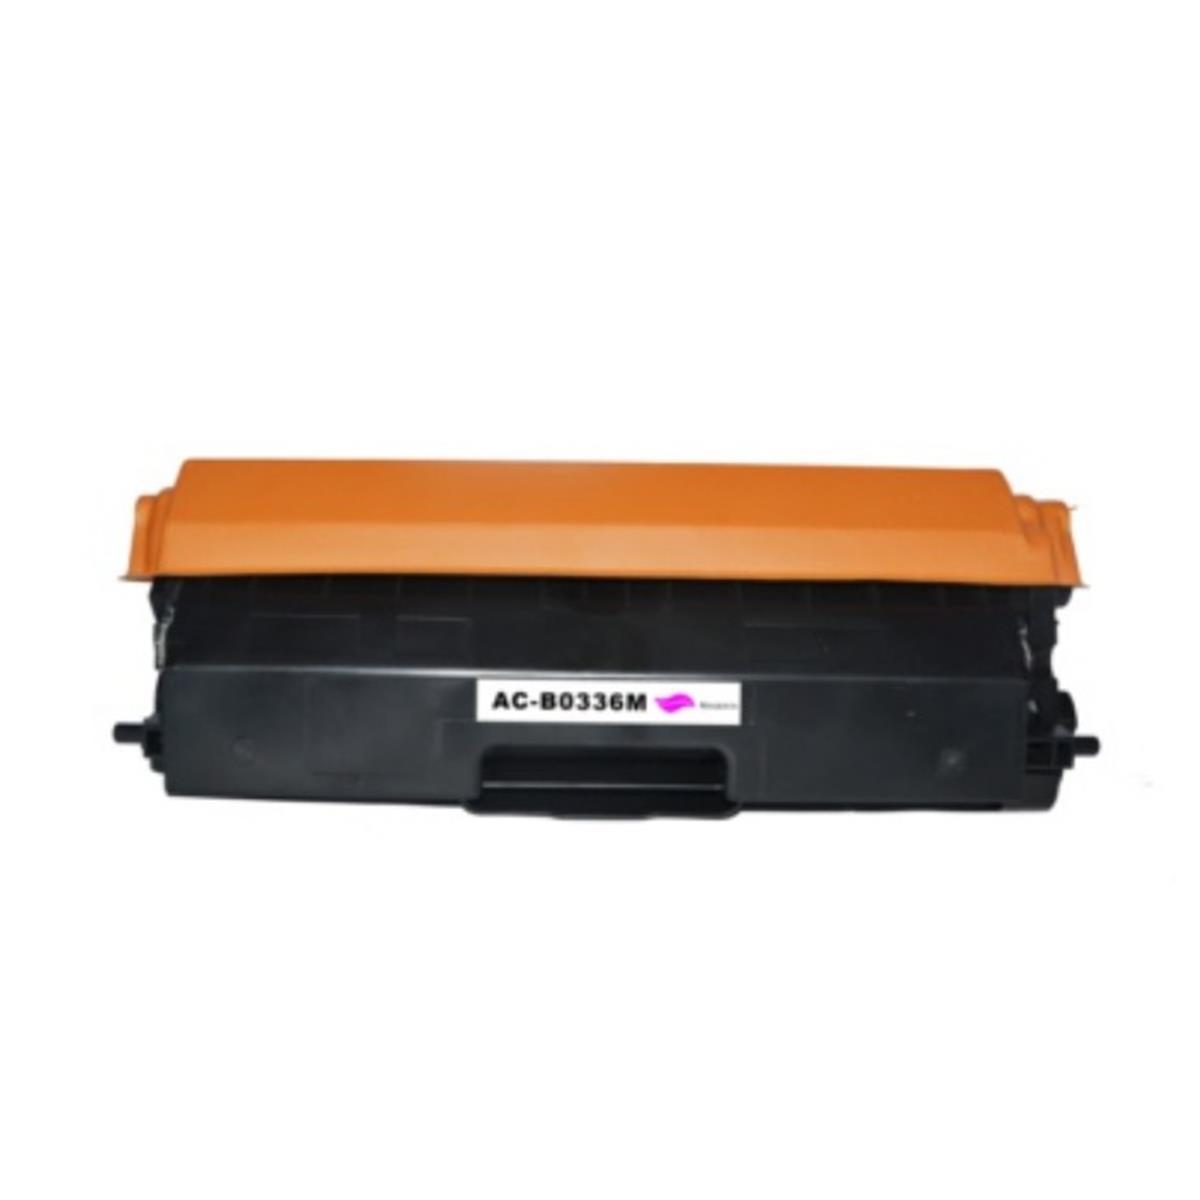 Picture of Aster AP-B0336M Magenta Toner Cartridge for Compatible OEM No.TN336M - 3500 Page Yield